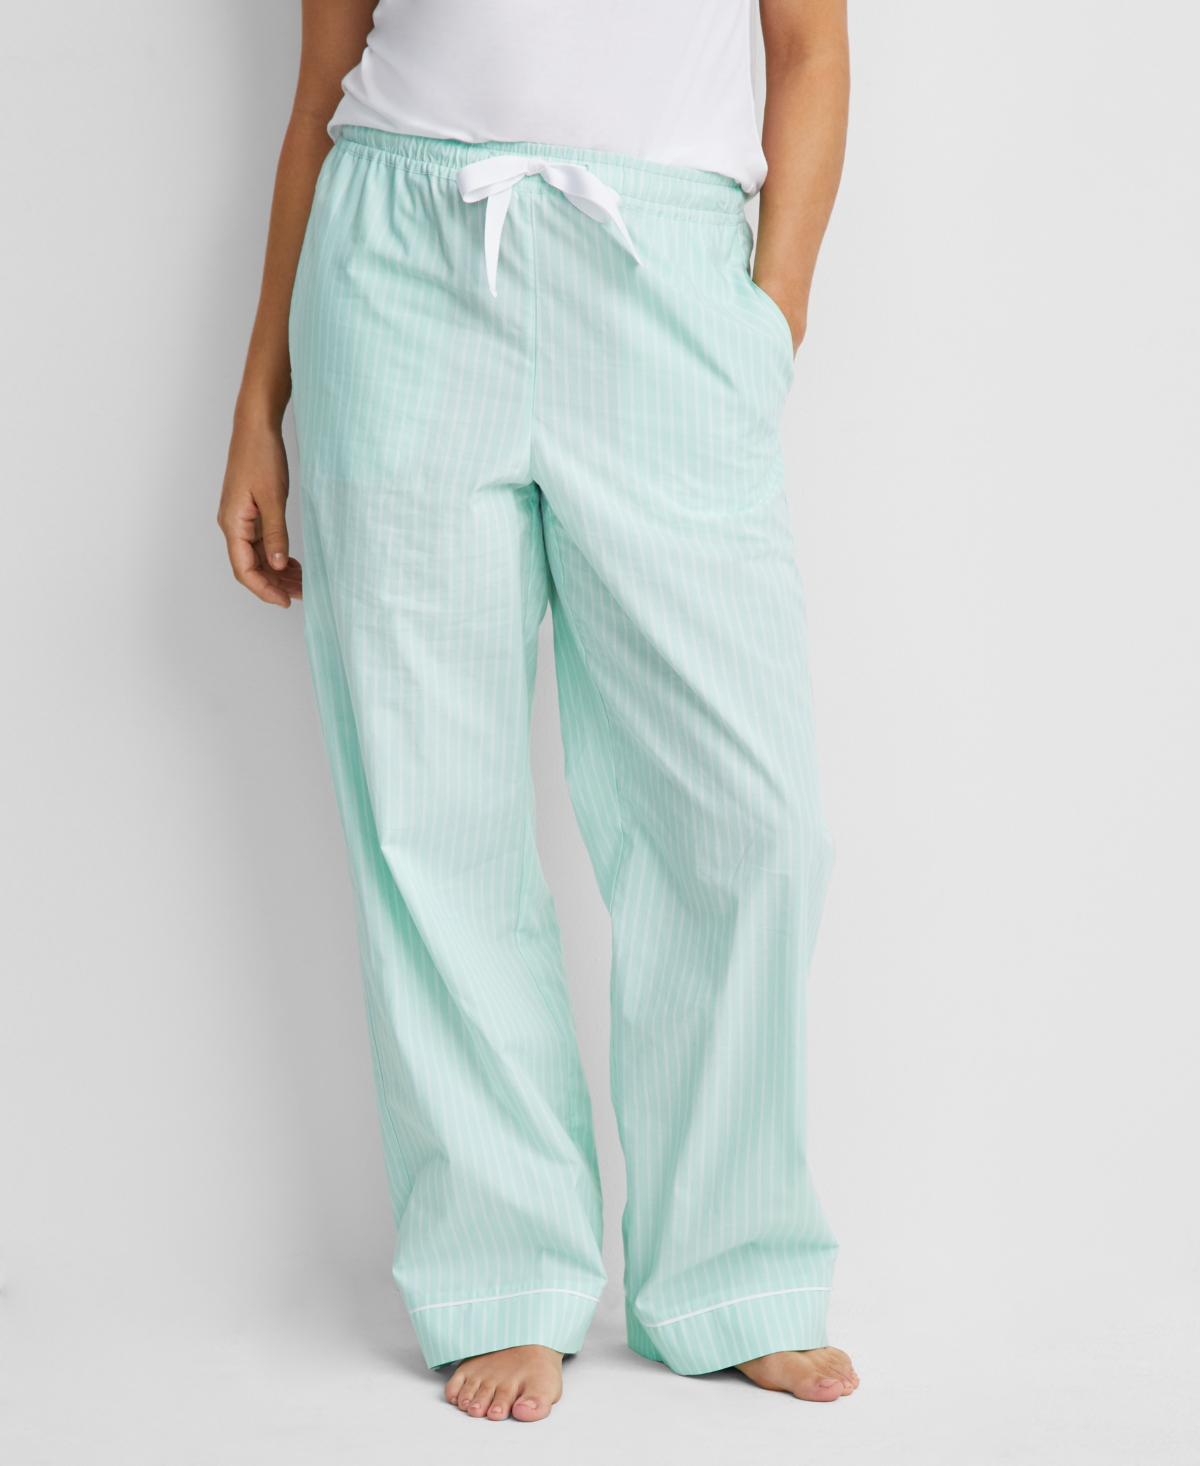 State Of Day Women's Printed Poplin Pajama Pants Xs-3x, Created For Macy's In Tea Green